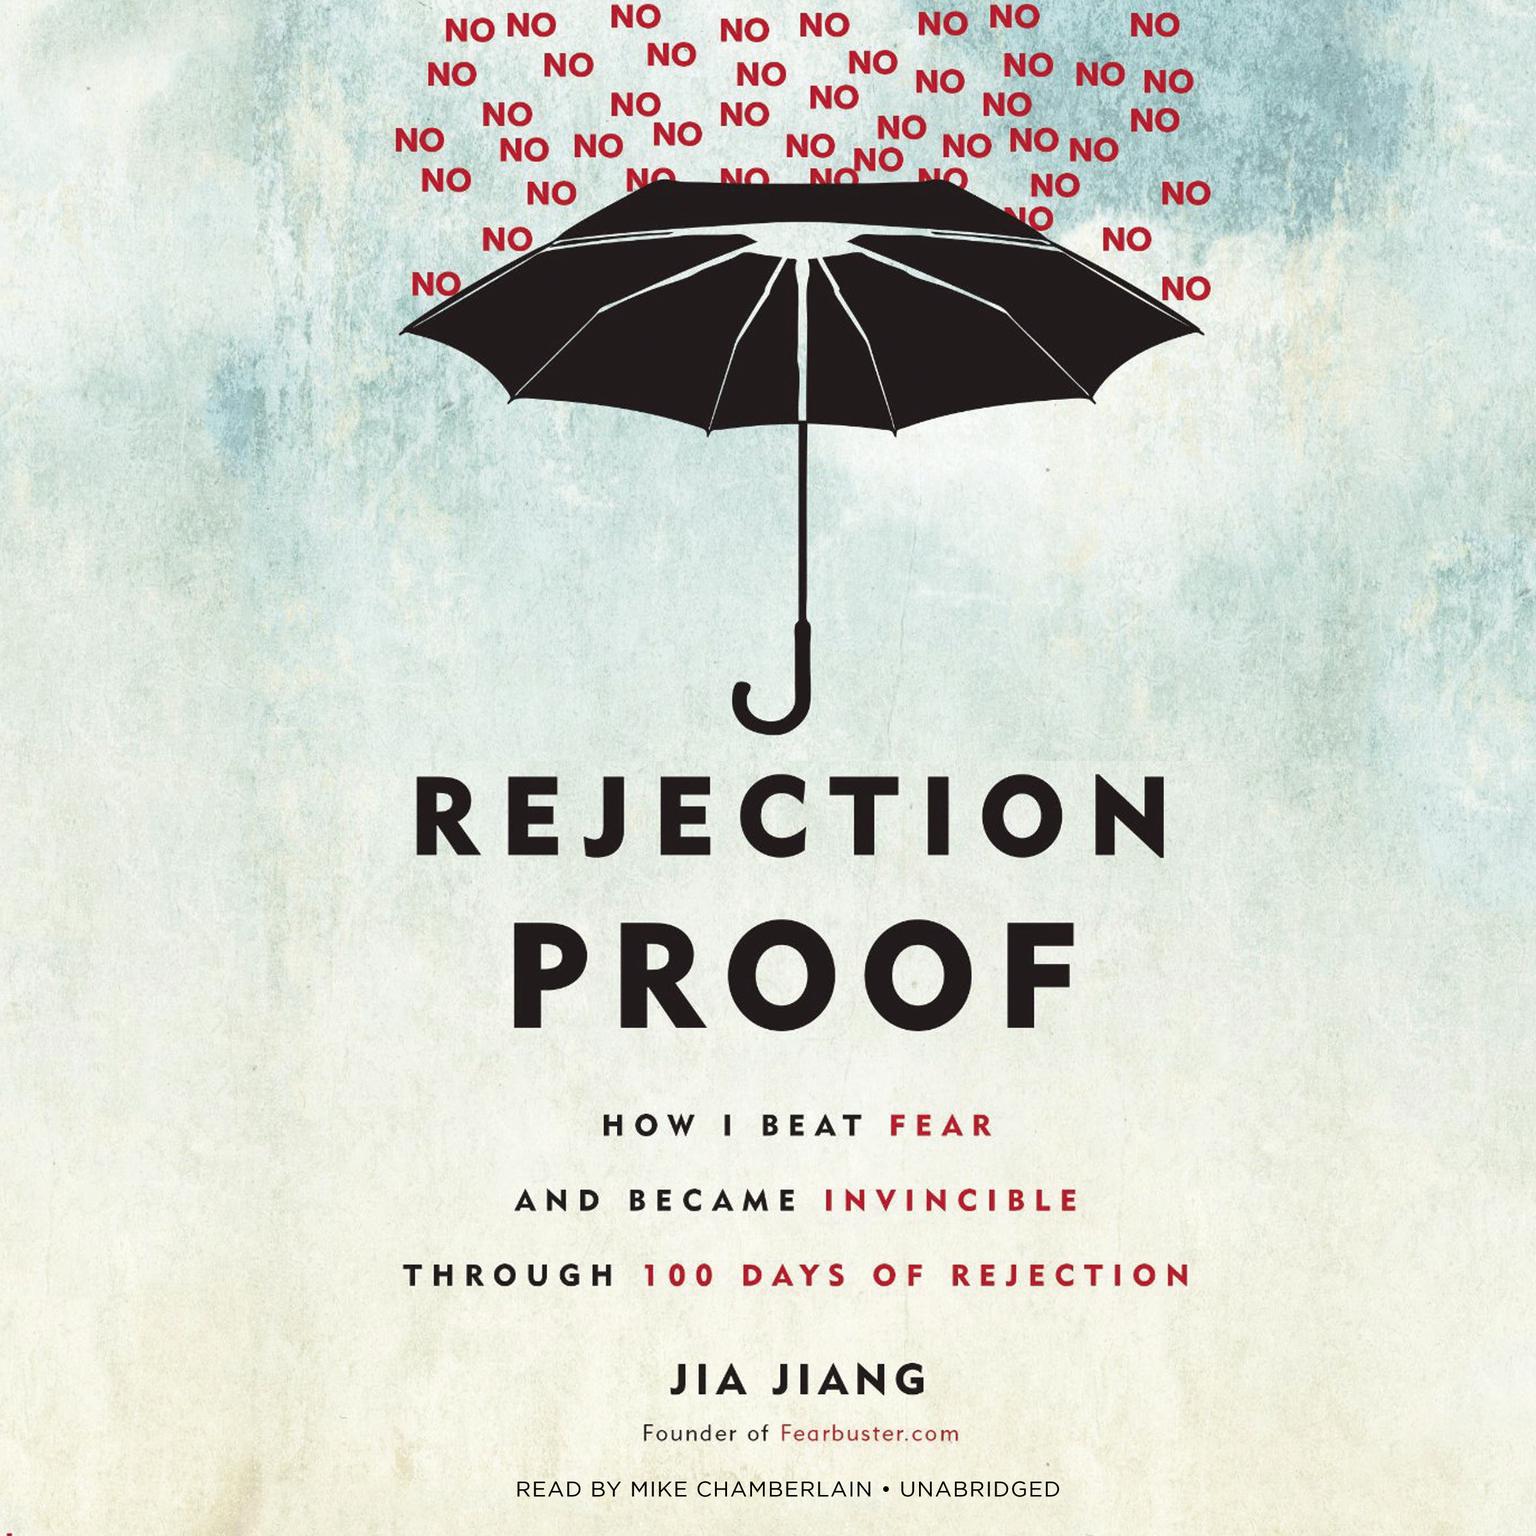 Rejection Proof: How I Beat Fear and Became Invincible through 100 Days of Rejection  Audiobook, by Jia Jiang